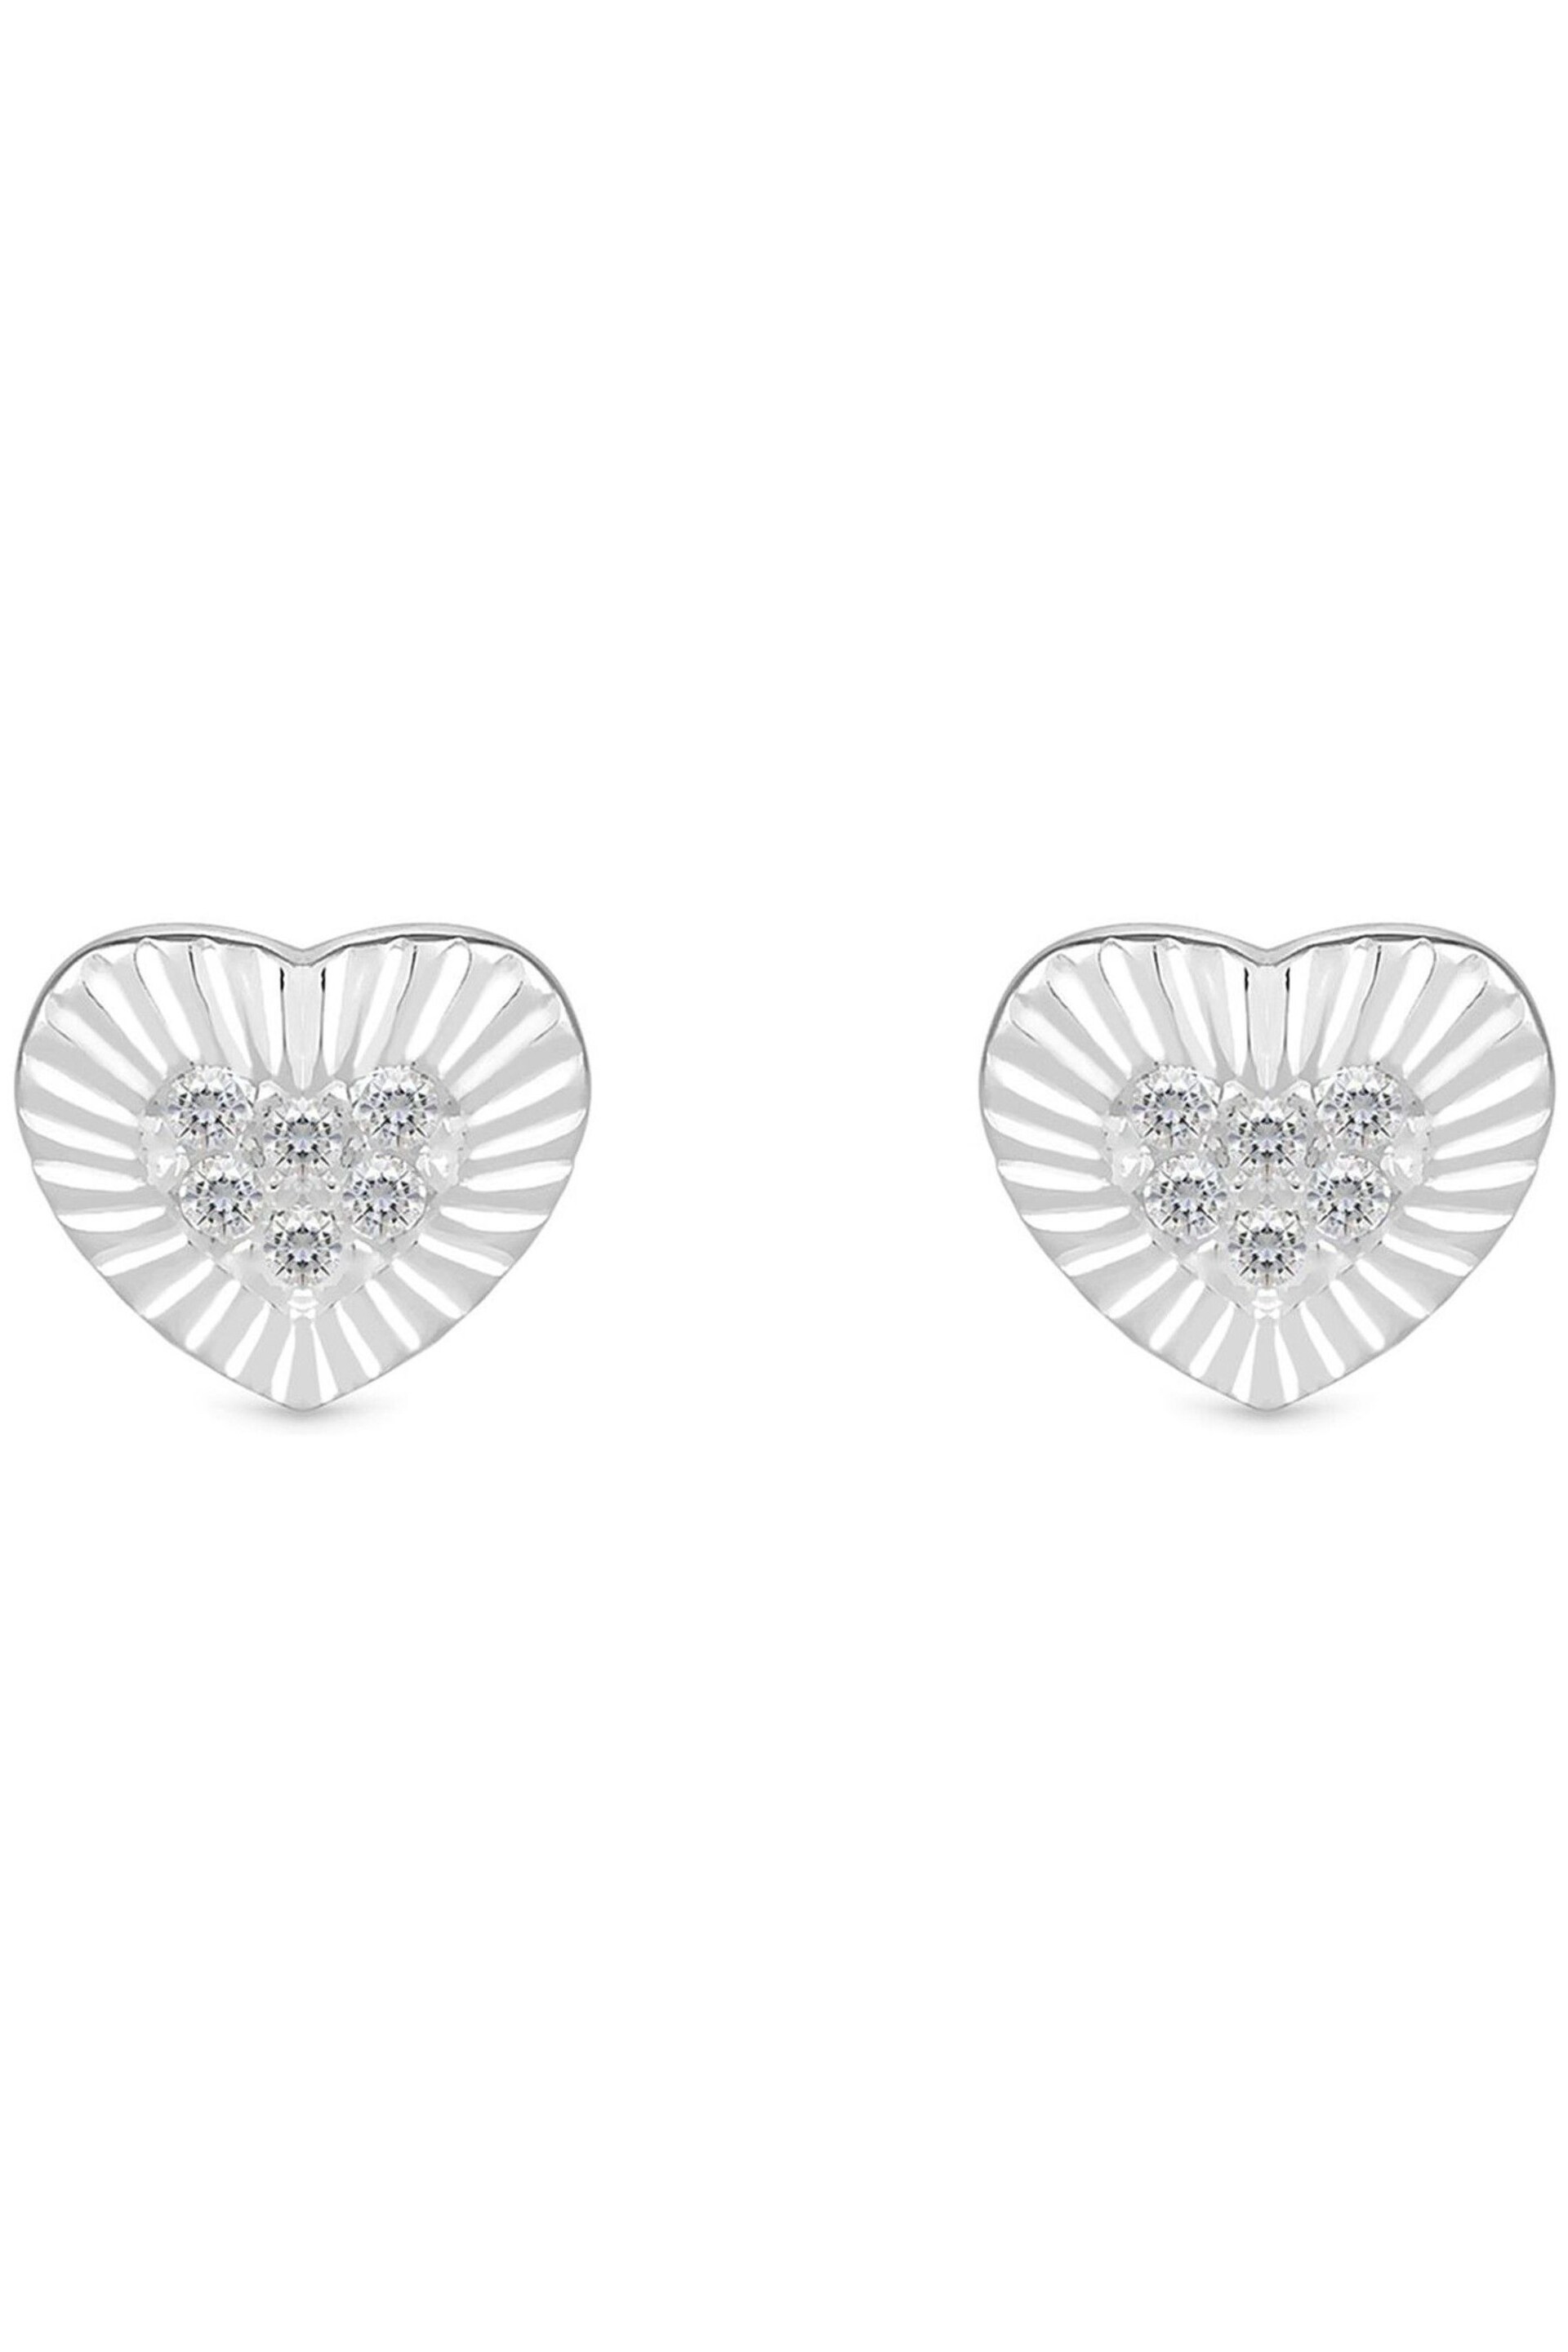 Simply Silver Silver Polished And Pave Mini Heart Stud Earrings - Image 1 of 1